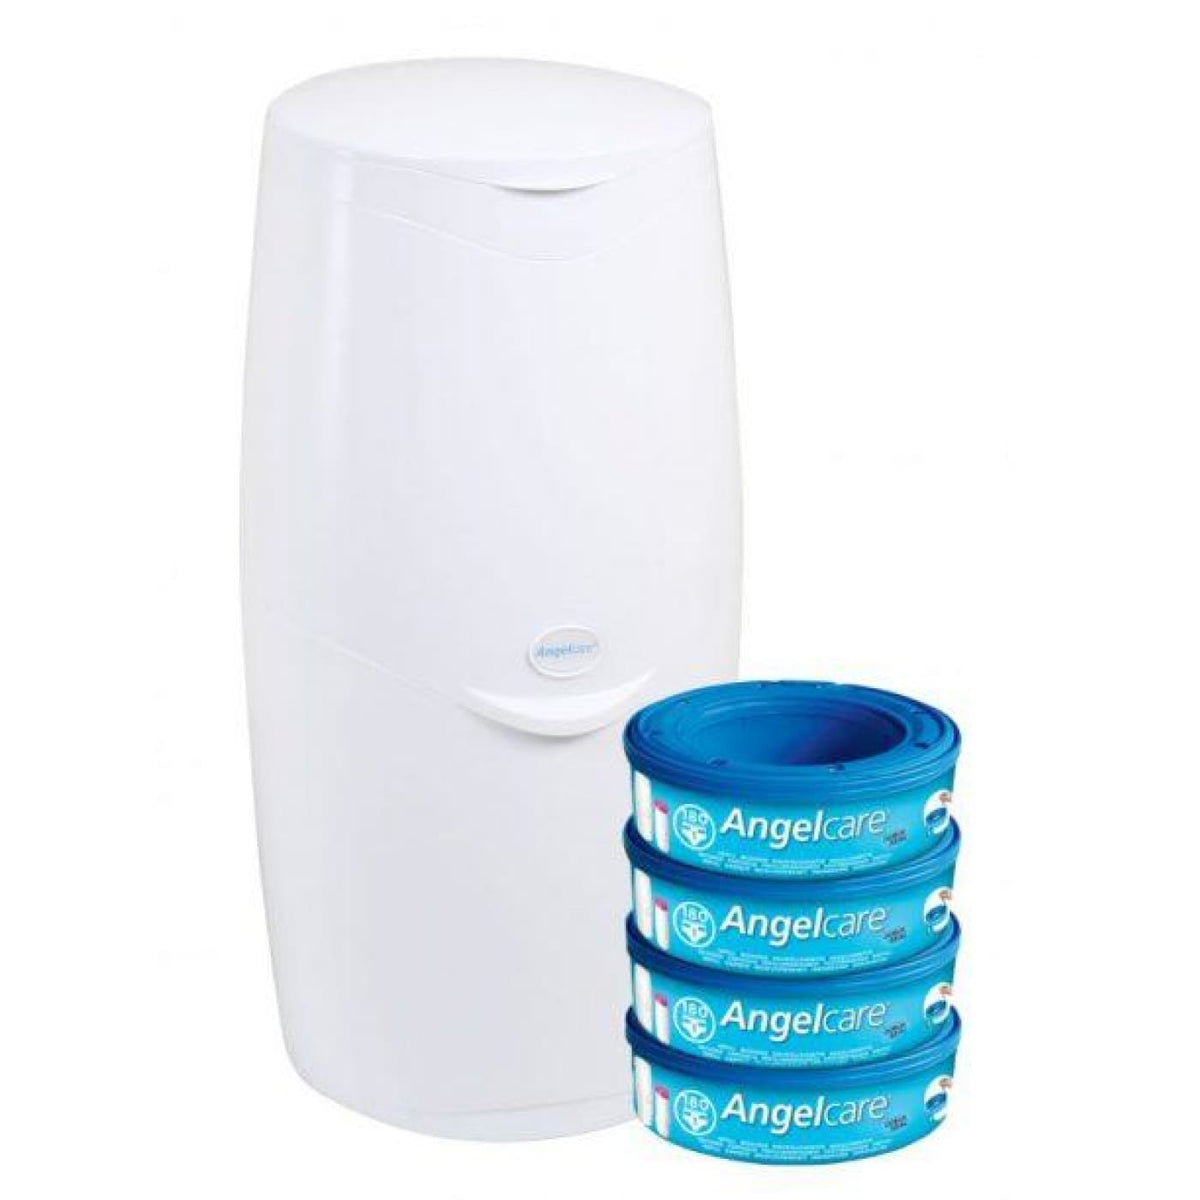 Angelcare Nappy System Starter Kit - BATHTIME &amp; CHANGING - NAPPY BINS/REFILLS/BUCKETS